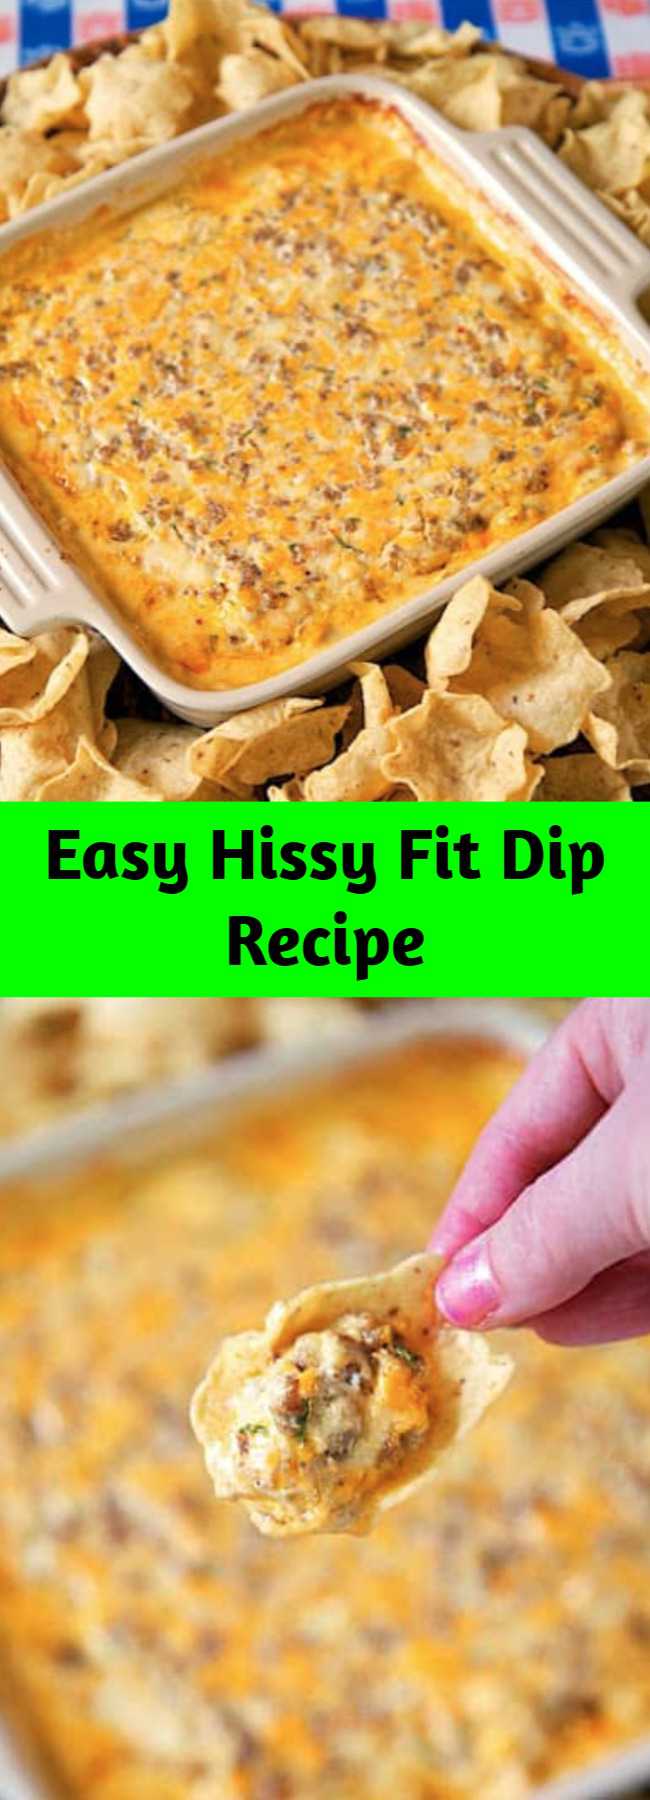 Easy Hissy Fit Dip Recipe - Sausage, sour cream, Velveeta, muenster, onion and garlic powder, Worcestershire sauce and parsley – SO good. You will definitely throw a hissy fit if you miss out on this dip! Crazy good! Can mix together and refrigerate a day before baking. Serve with chips and veggies! It is always gone in a flash!